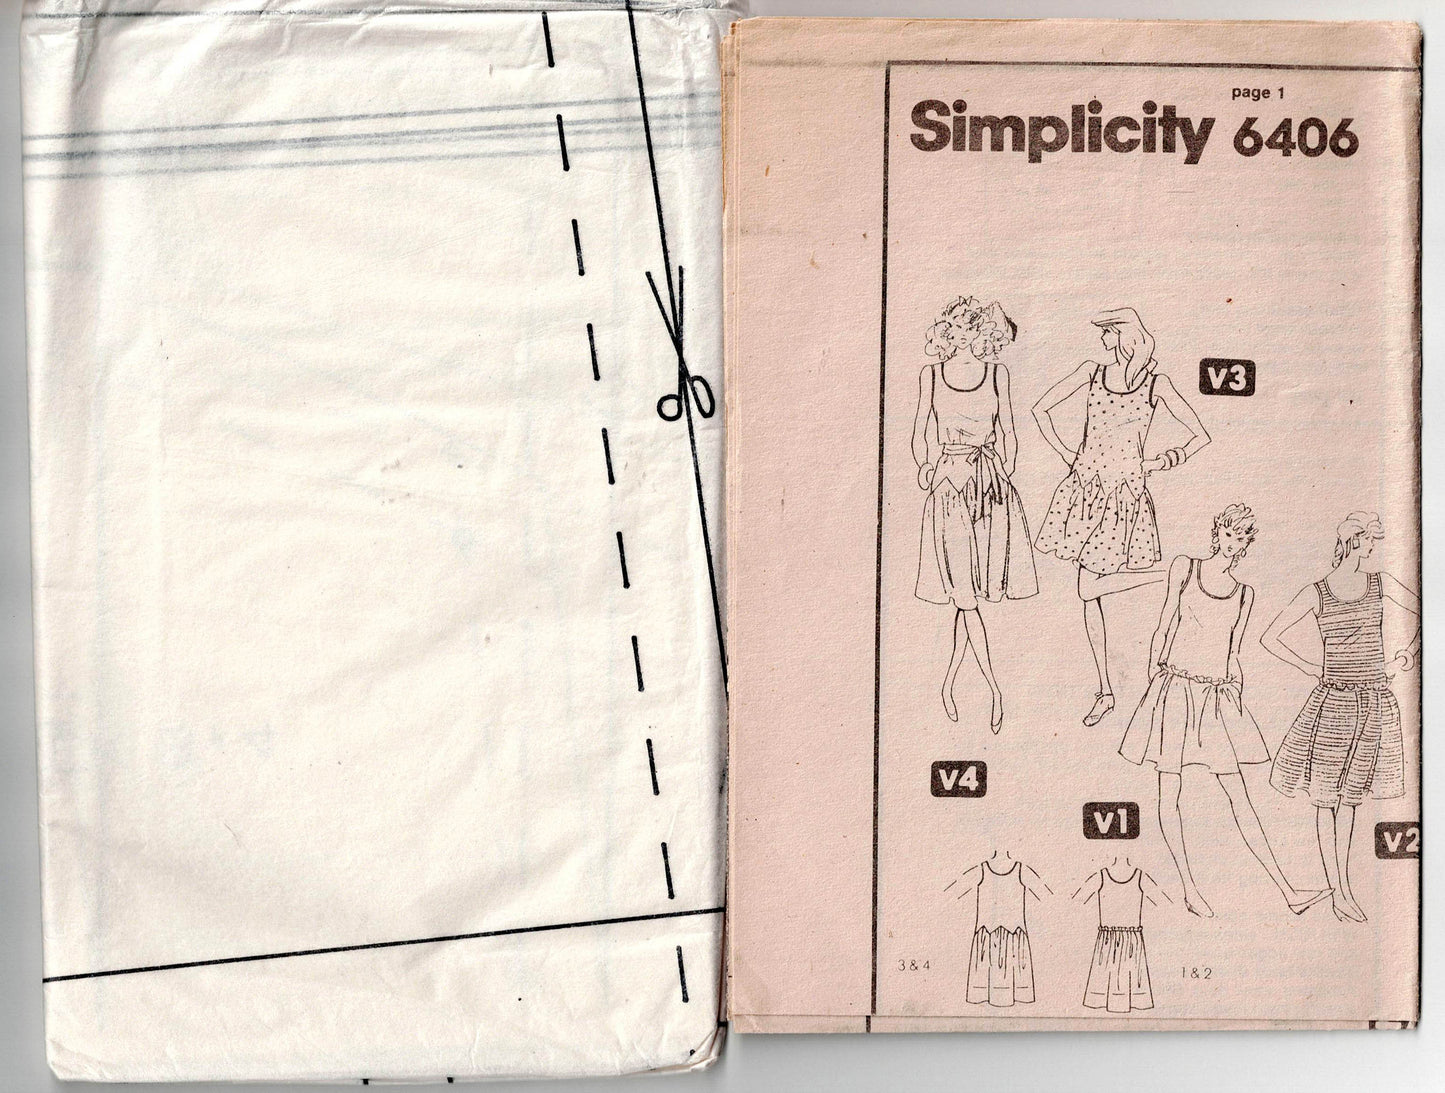 Simplicity 6406 Womens Dropped Waist Sundress 1980s Vintage Sewing Pattern Size 14 Bust 36 inches